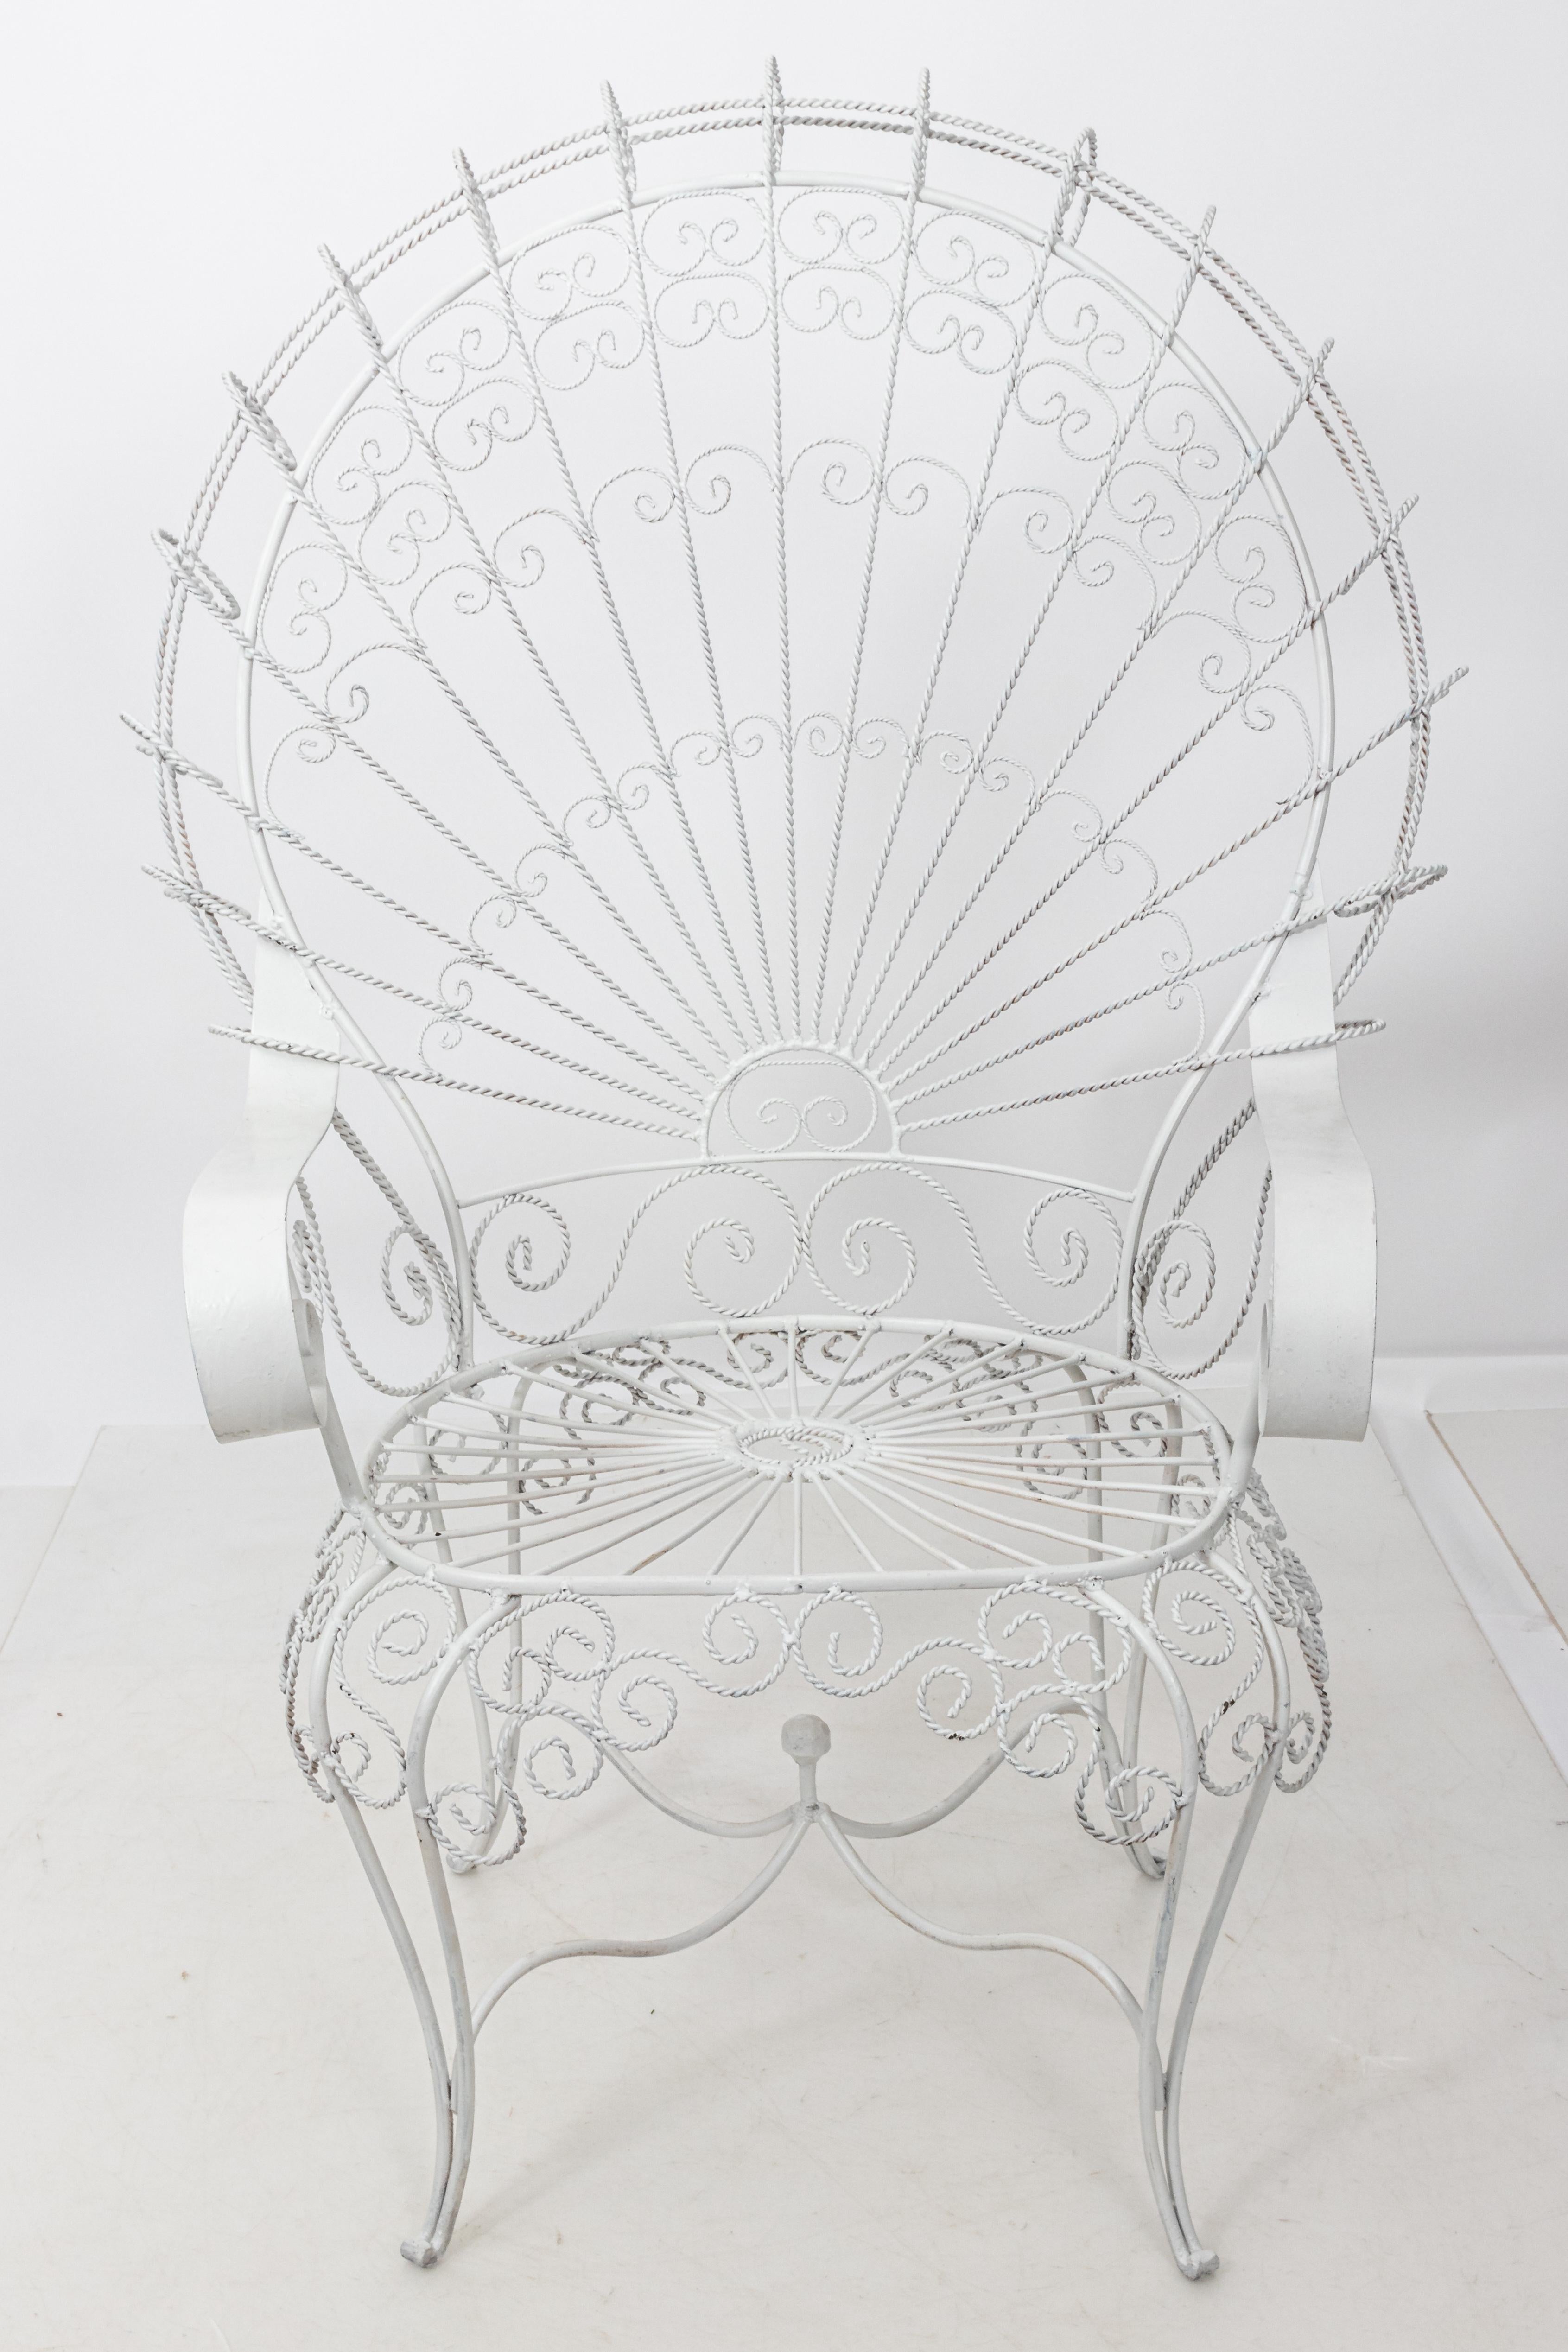 English Country metal wire peacock outdoor armchairs for the garden. These Victorian style chairs were produced later in the 20th century in England. High-quality twisted wirework frame features an ornate fanned back and scrolled wrought iron